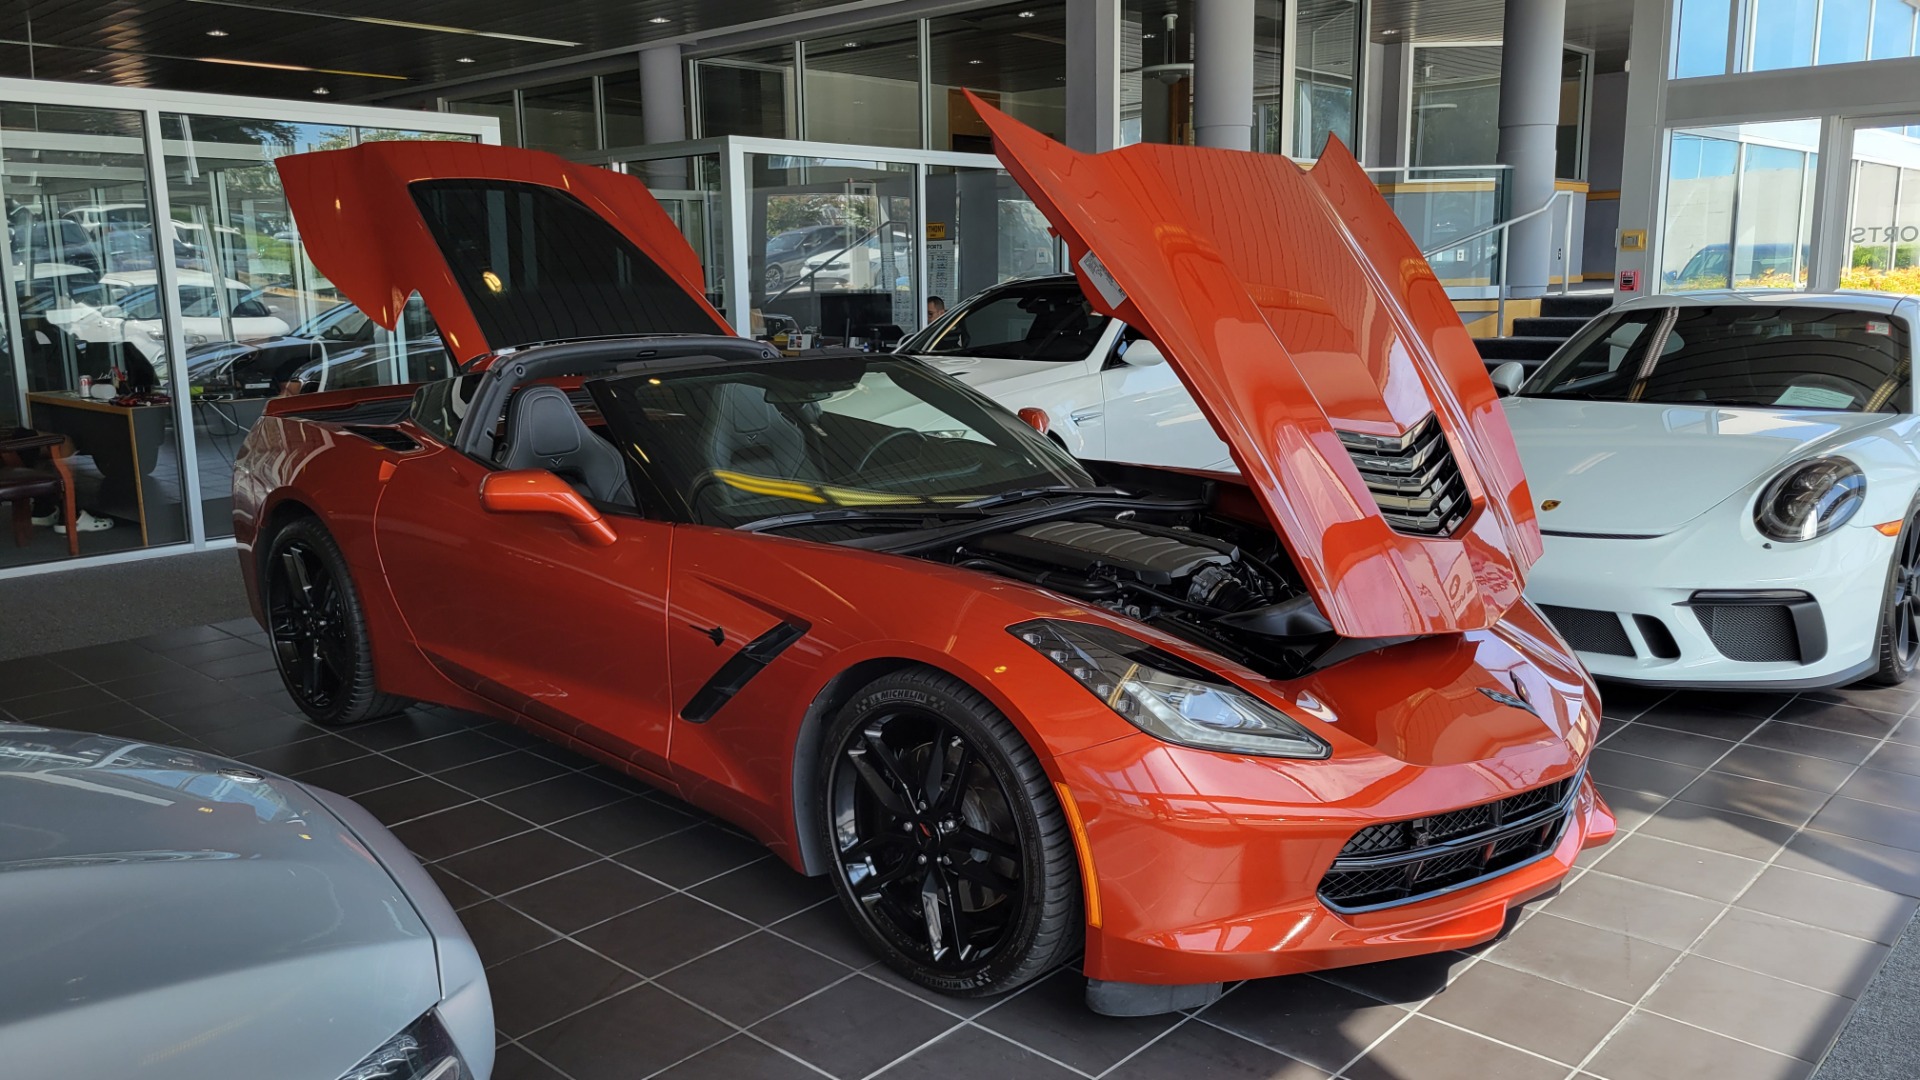 Used 2016 Chevrolet CORVETTE C7 COUPE / Z51 / 2LT / NAV / AUTO / PERF DATA & VIDEO RECORDER for sale $56,495 at Formula Imports in Charlotte NC 28227 9